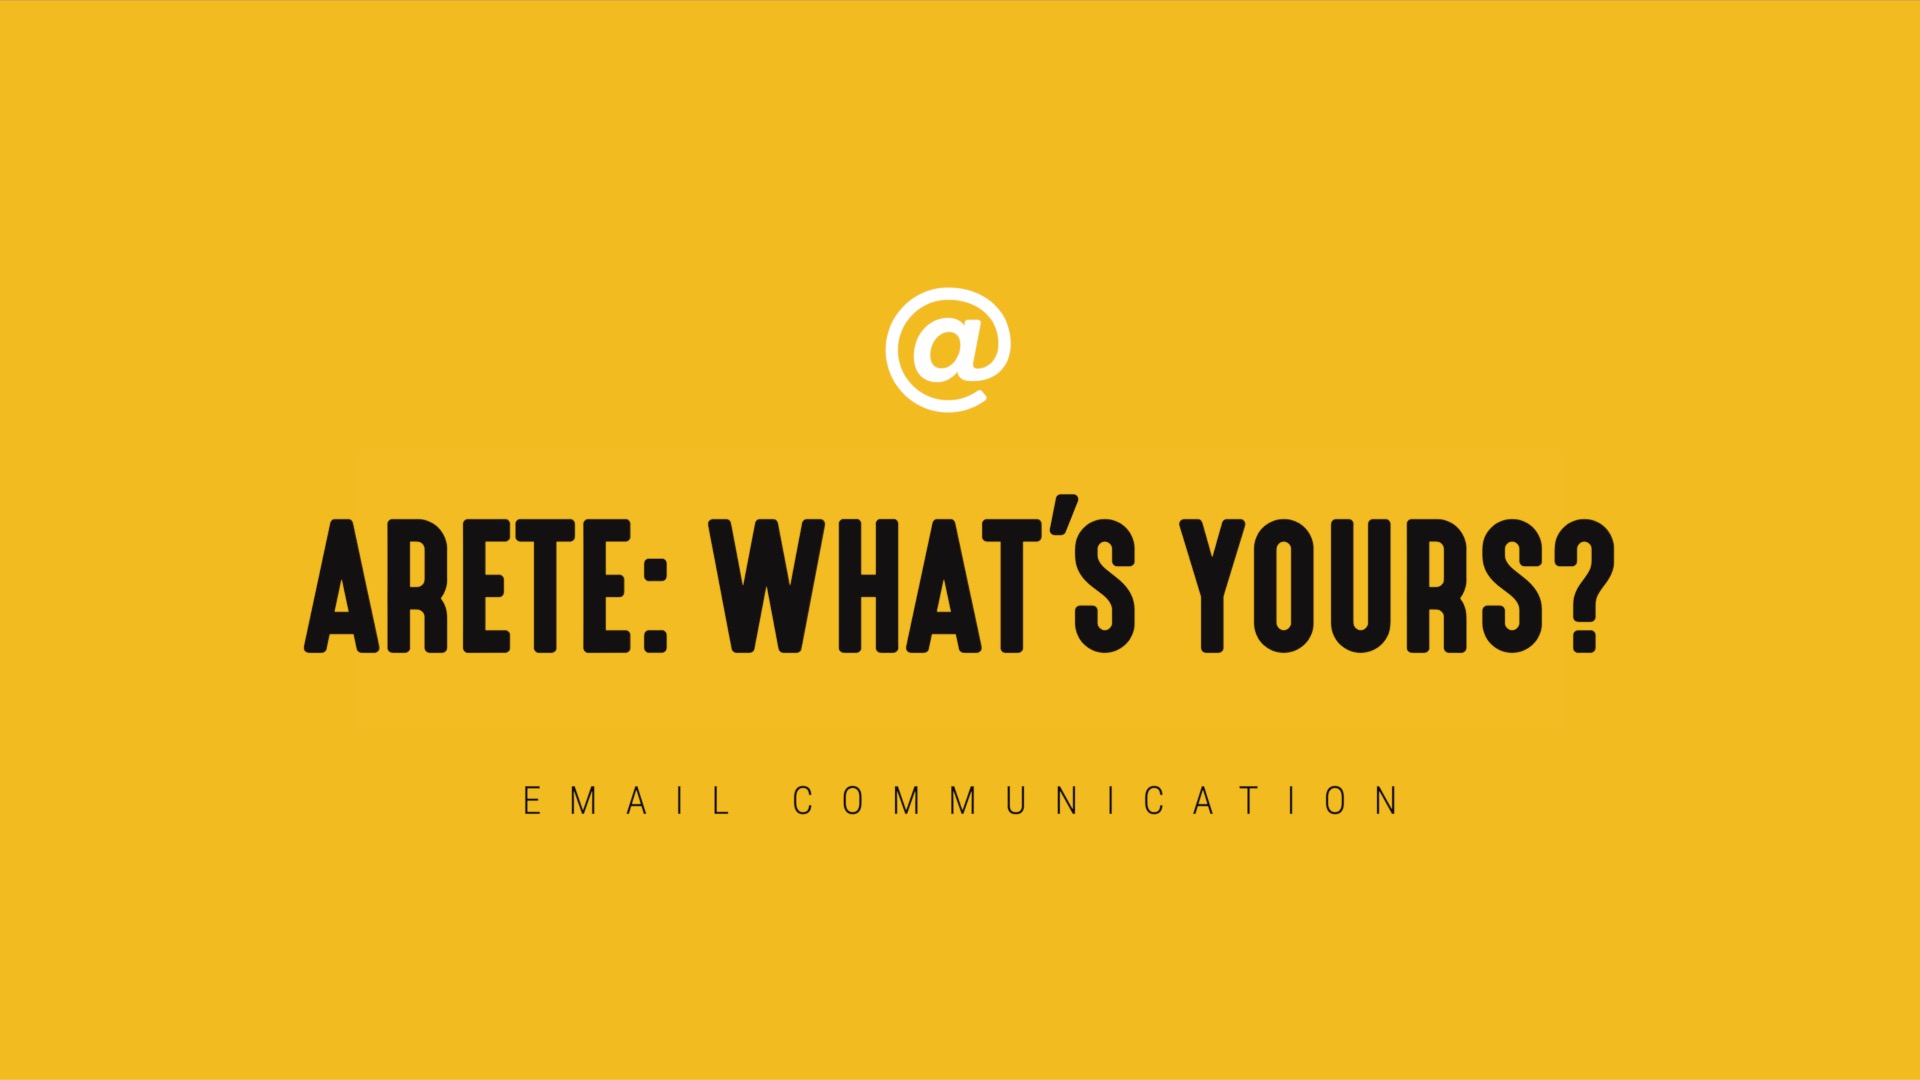 [NEW] Single-Topic Email | Arete – What’s Yours?